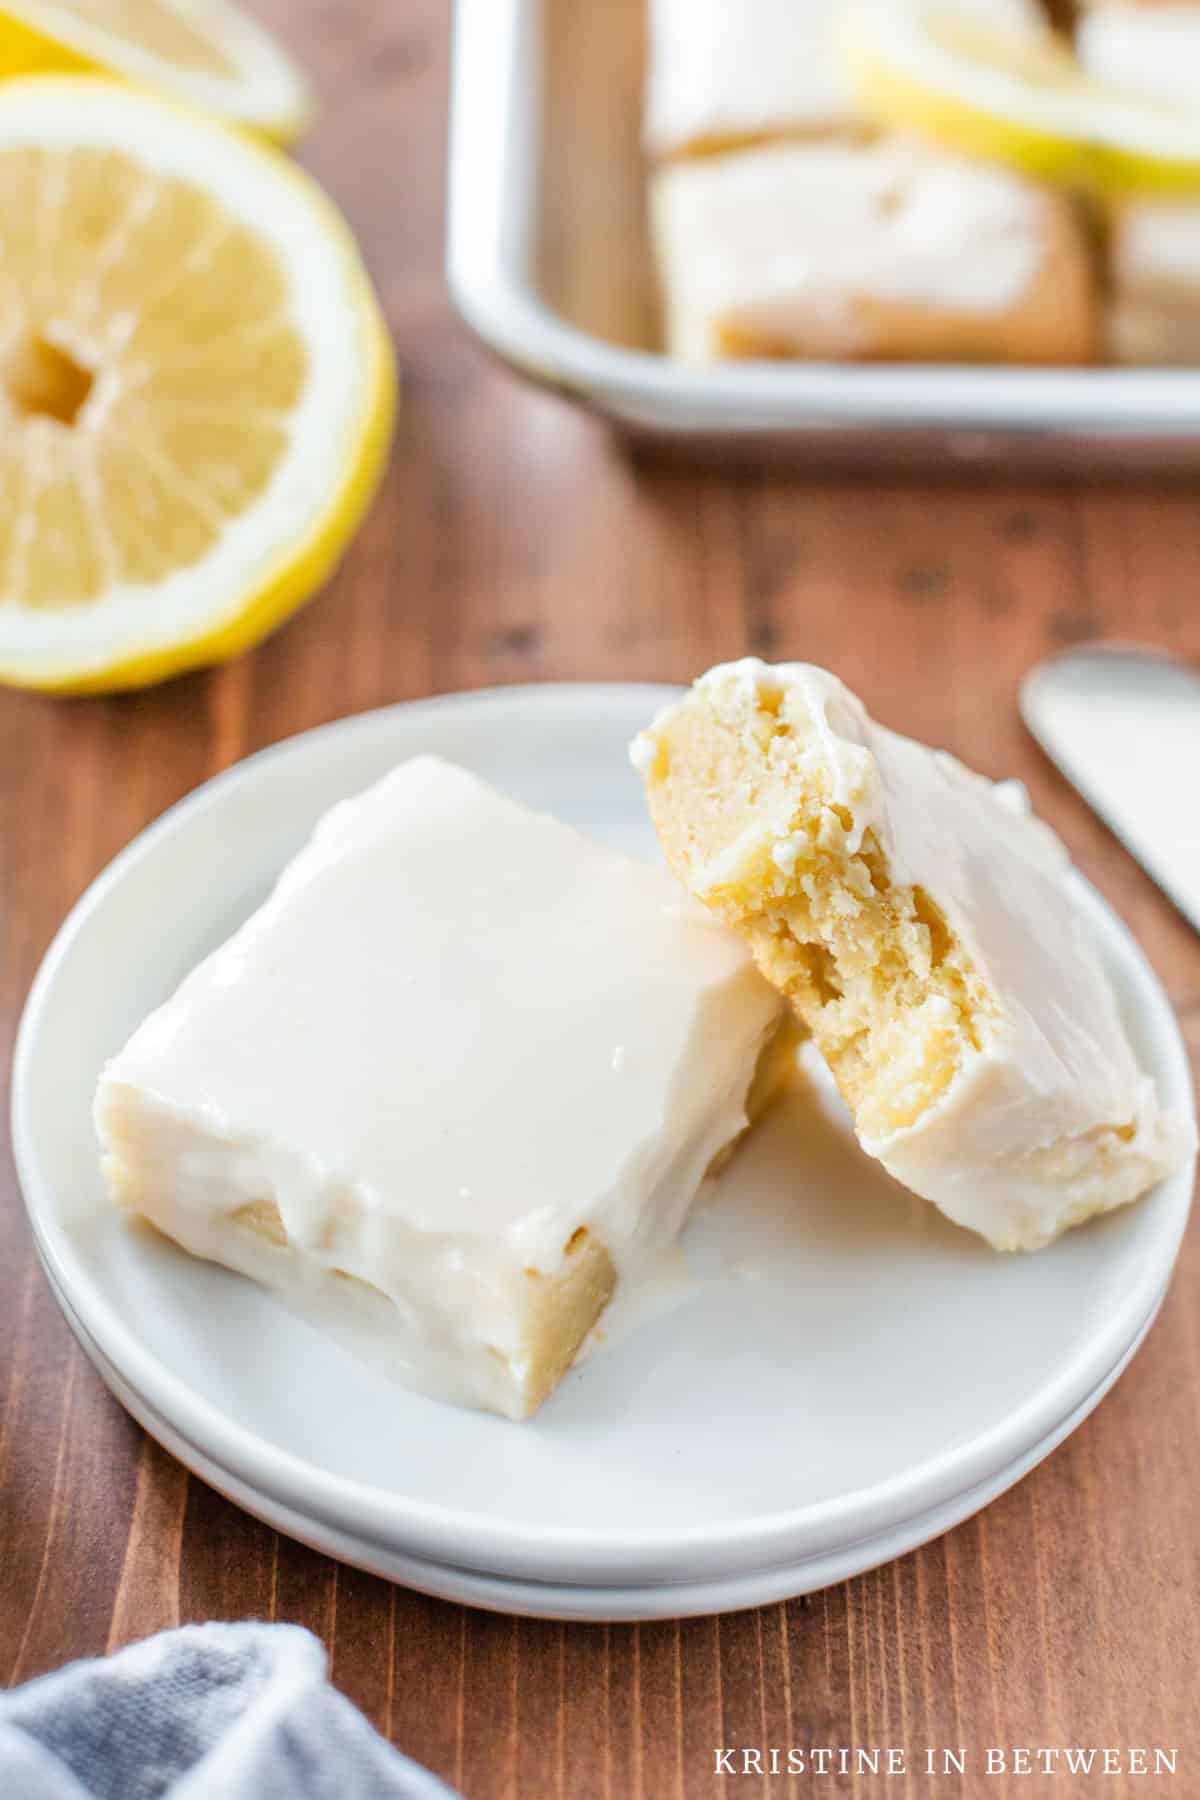 Two lemon brownies sitting on a white plate with a lemon and the rest of the bars in the background.